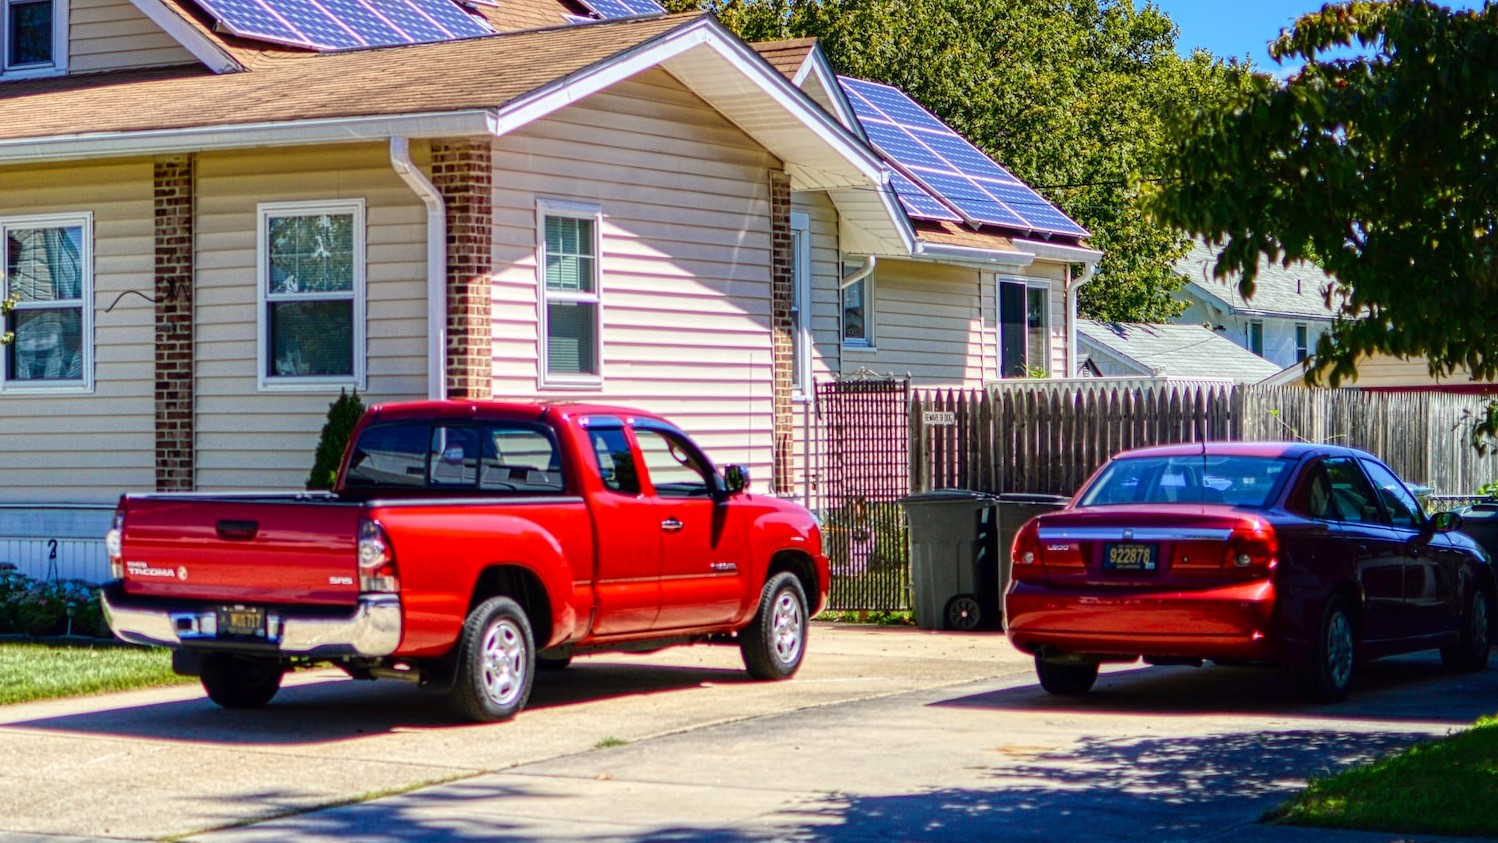 Solar panels capture energy from the sun| Goodwill Car Donations